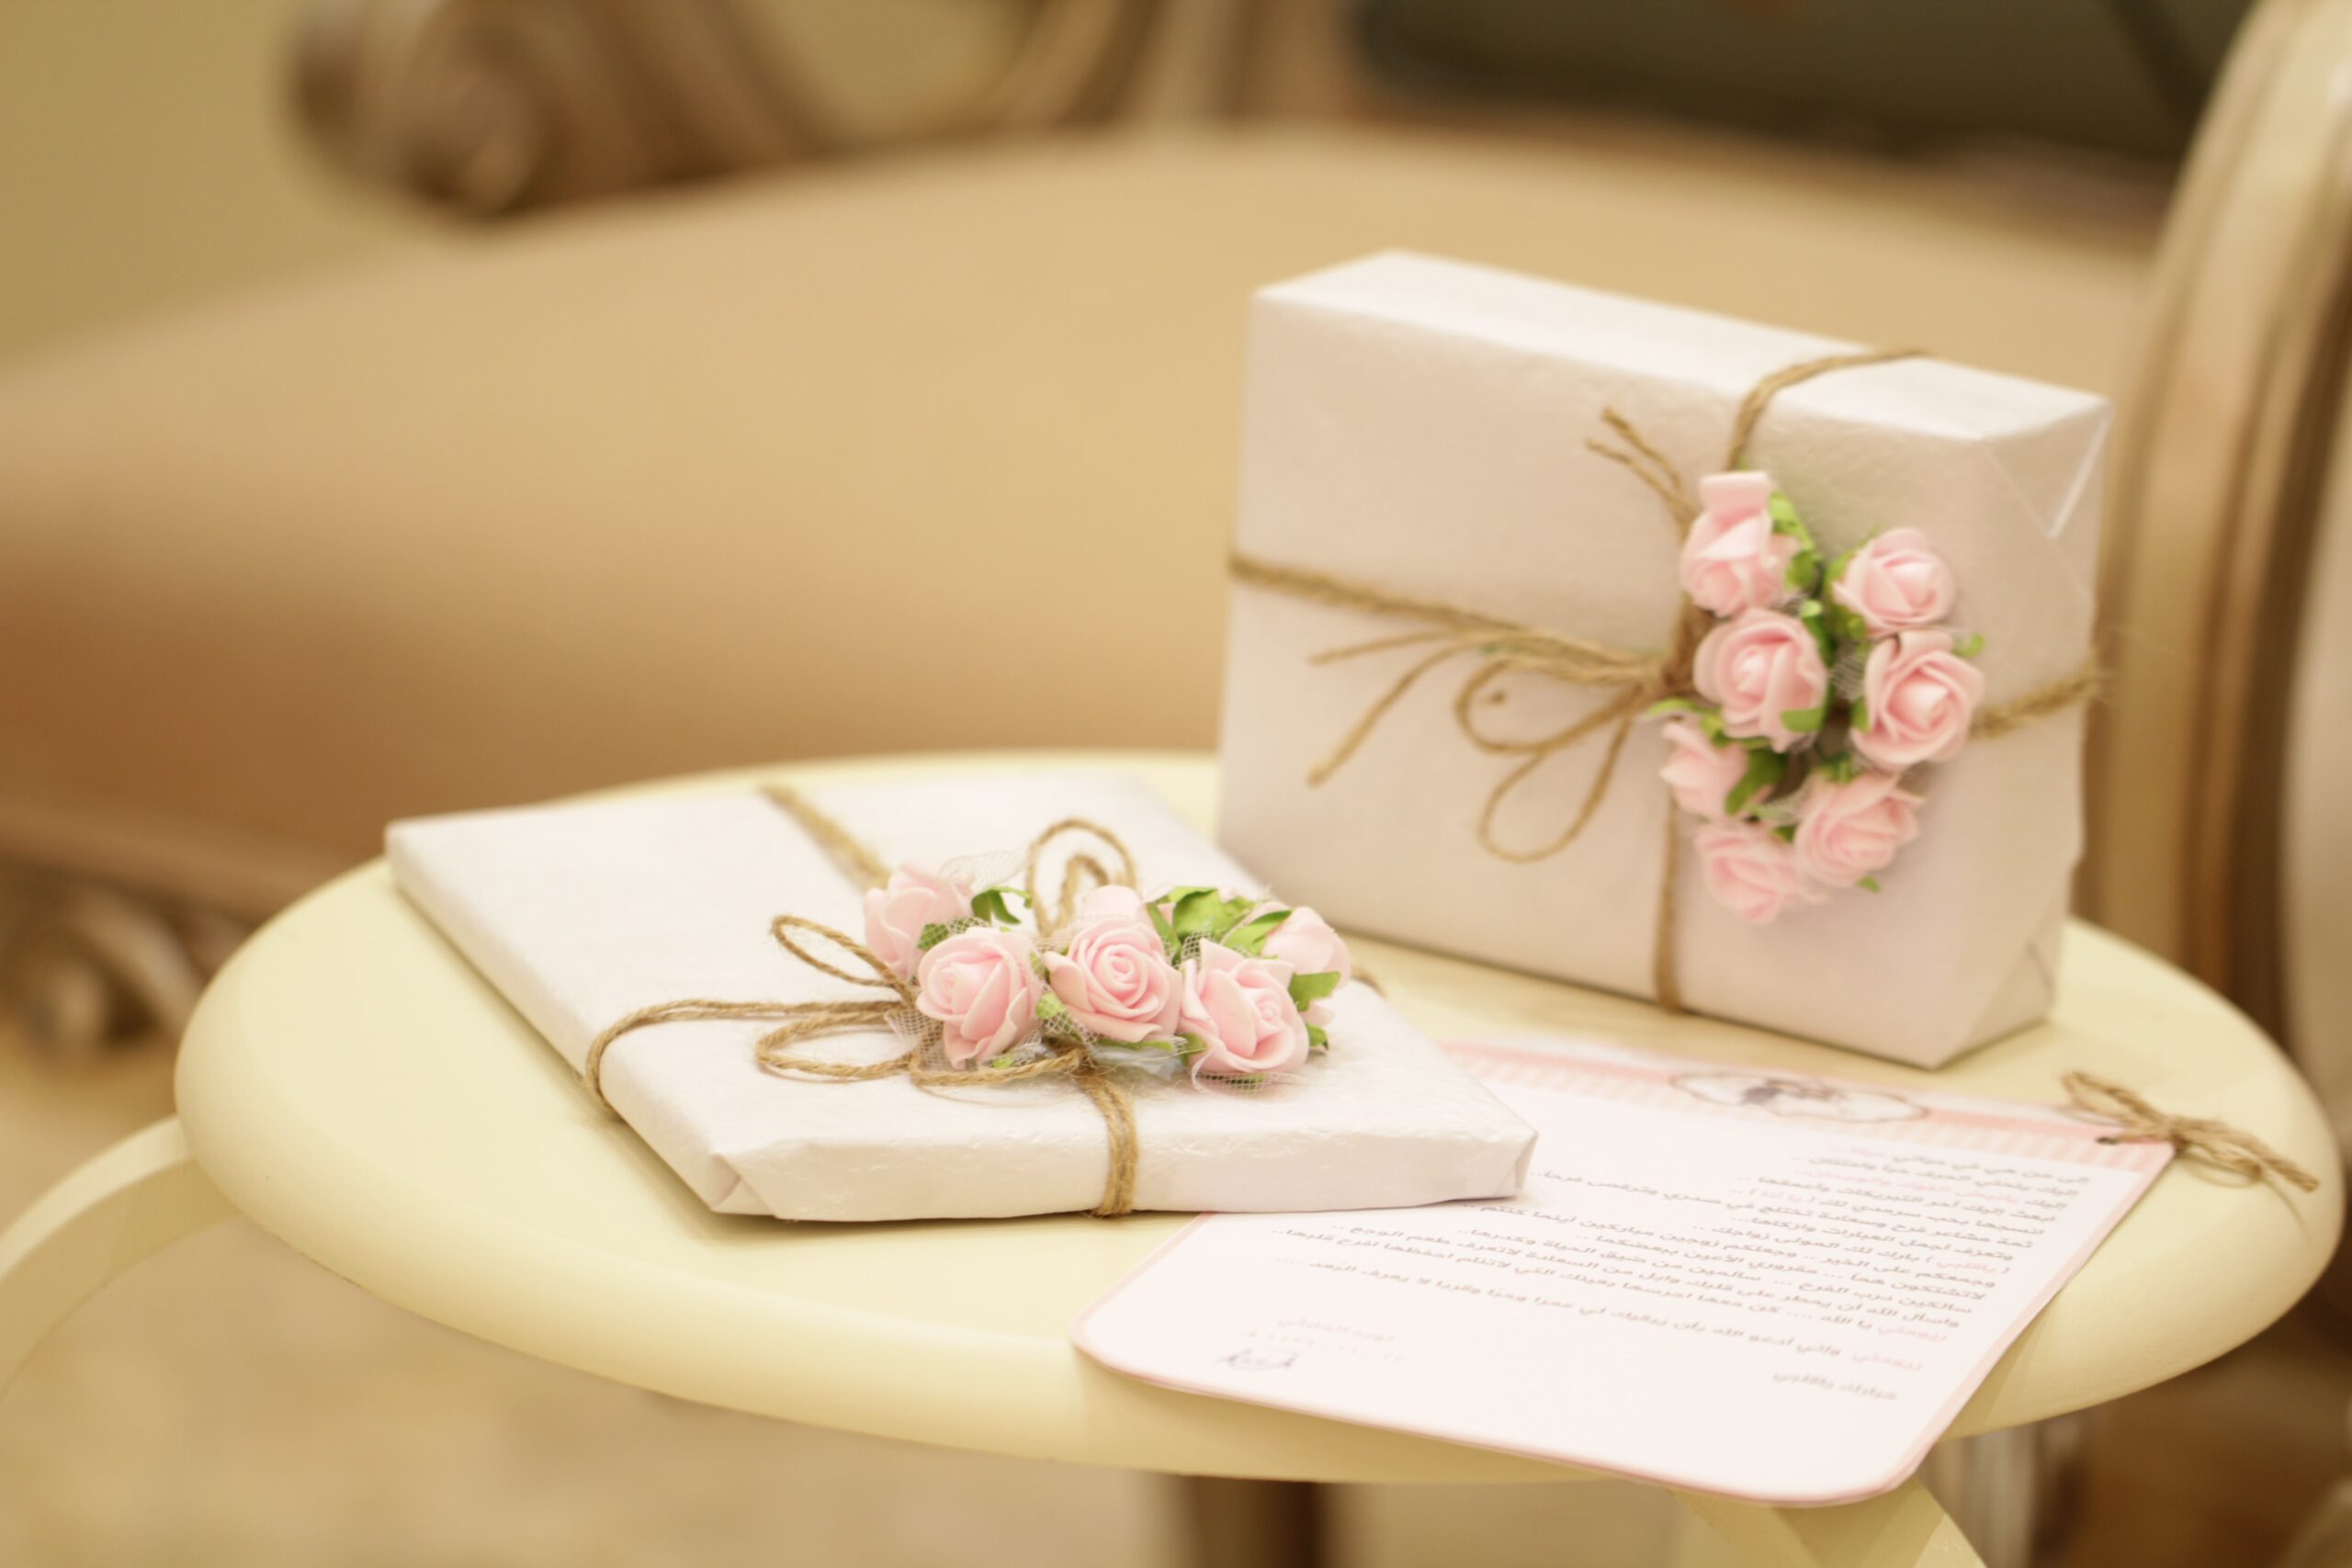 Gift Ideas for Newlyweds